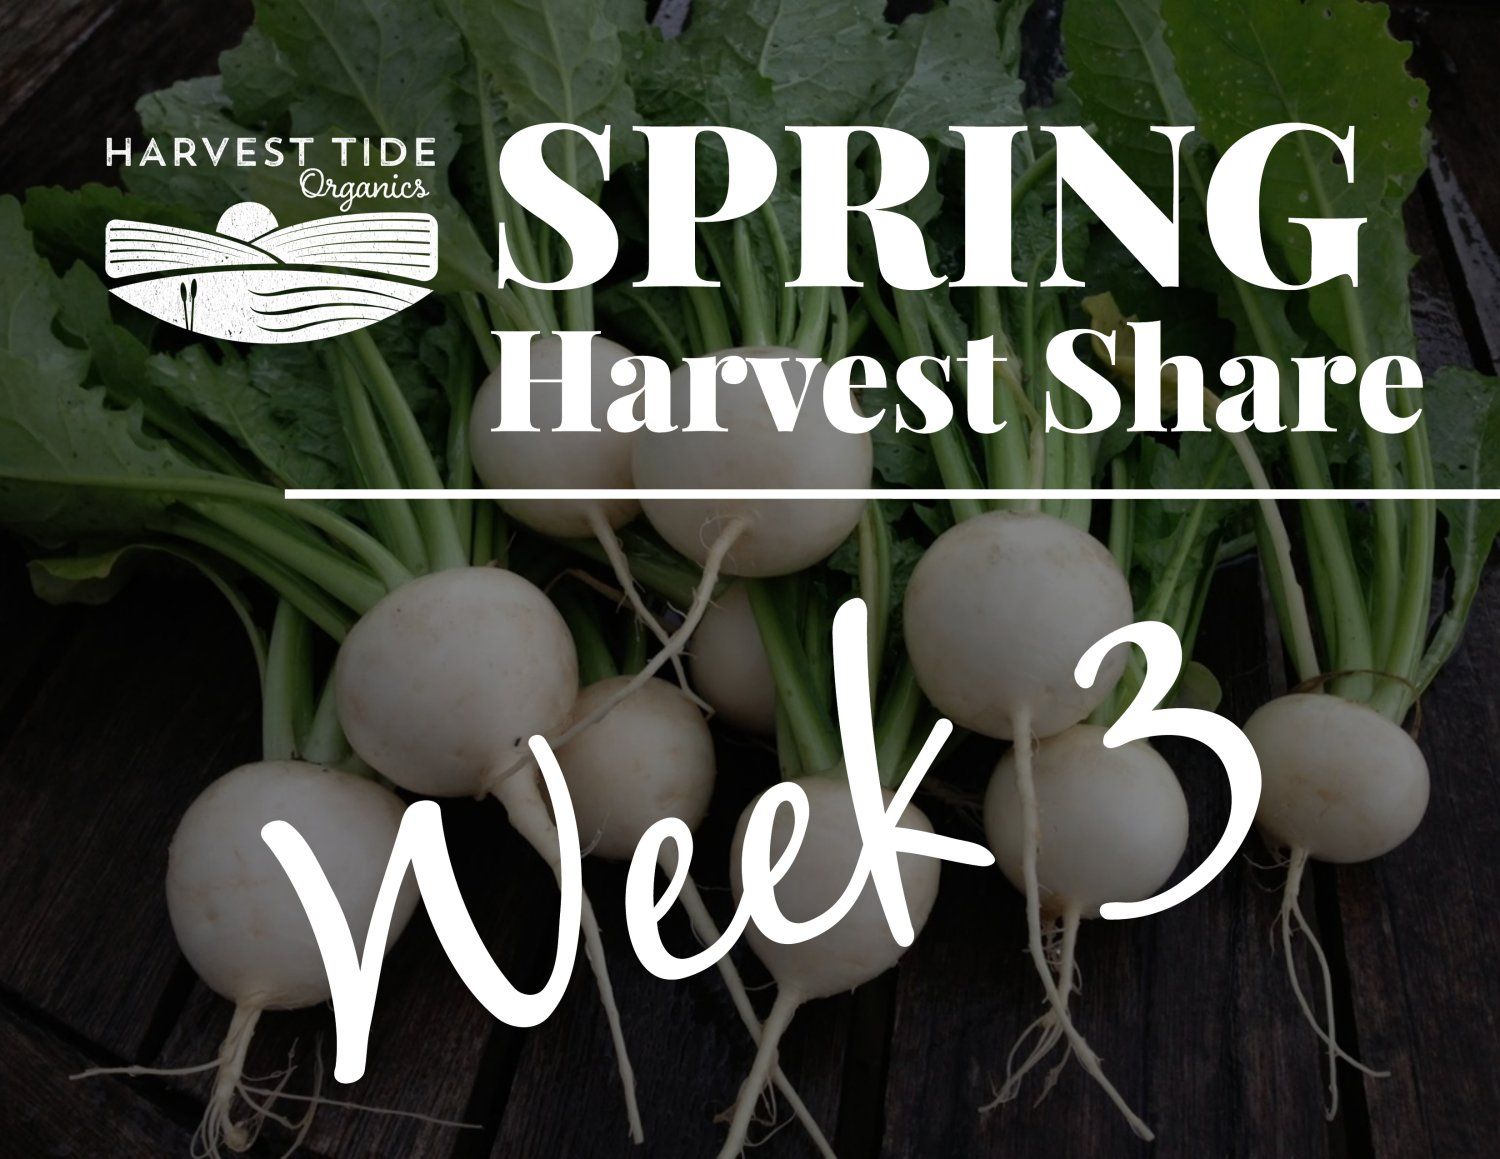 Previous Happening: Spring Harvest Share - Week 3